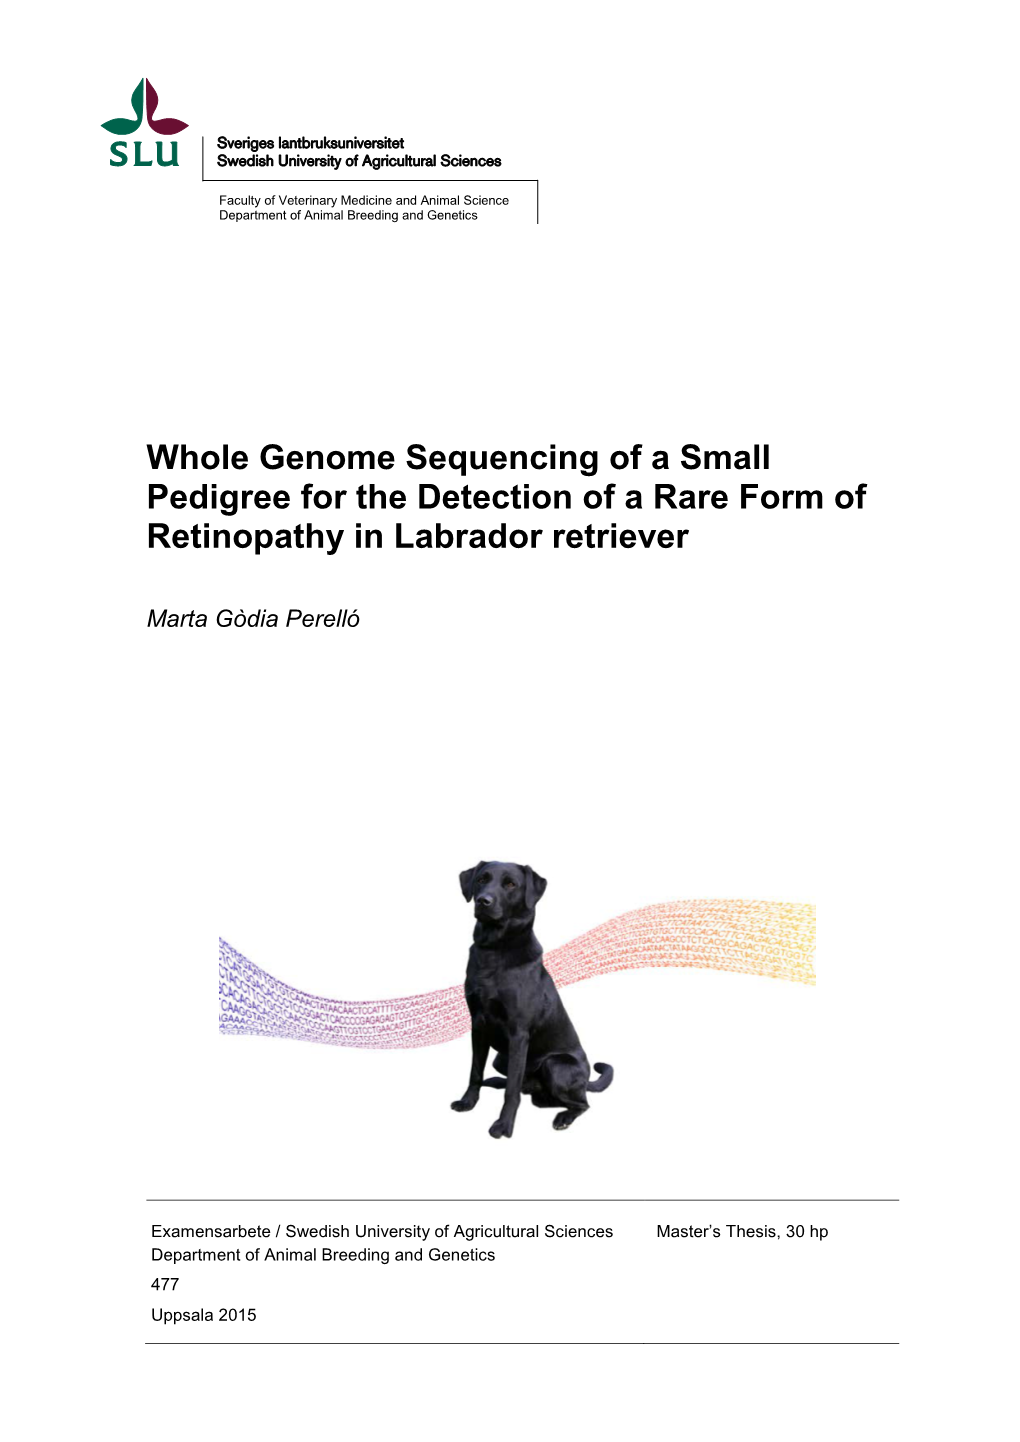 Whole Genome Sequencing of a Small Pedigree for the Detection of a Rare Form of Retinopathy in Labrador Retriever